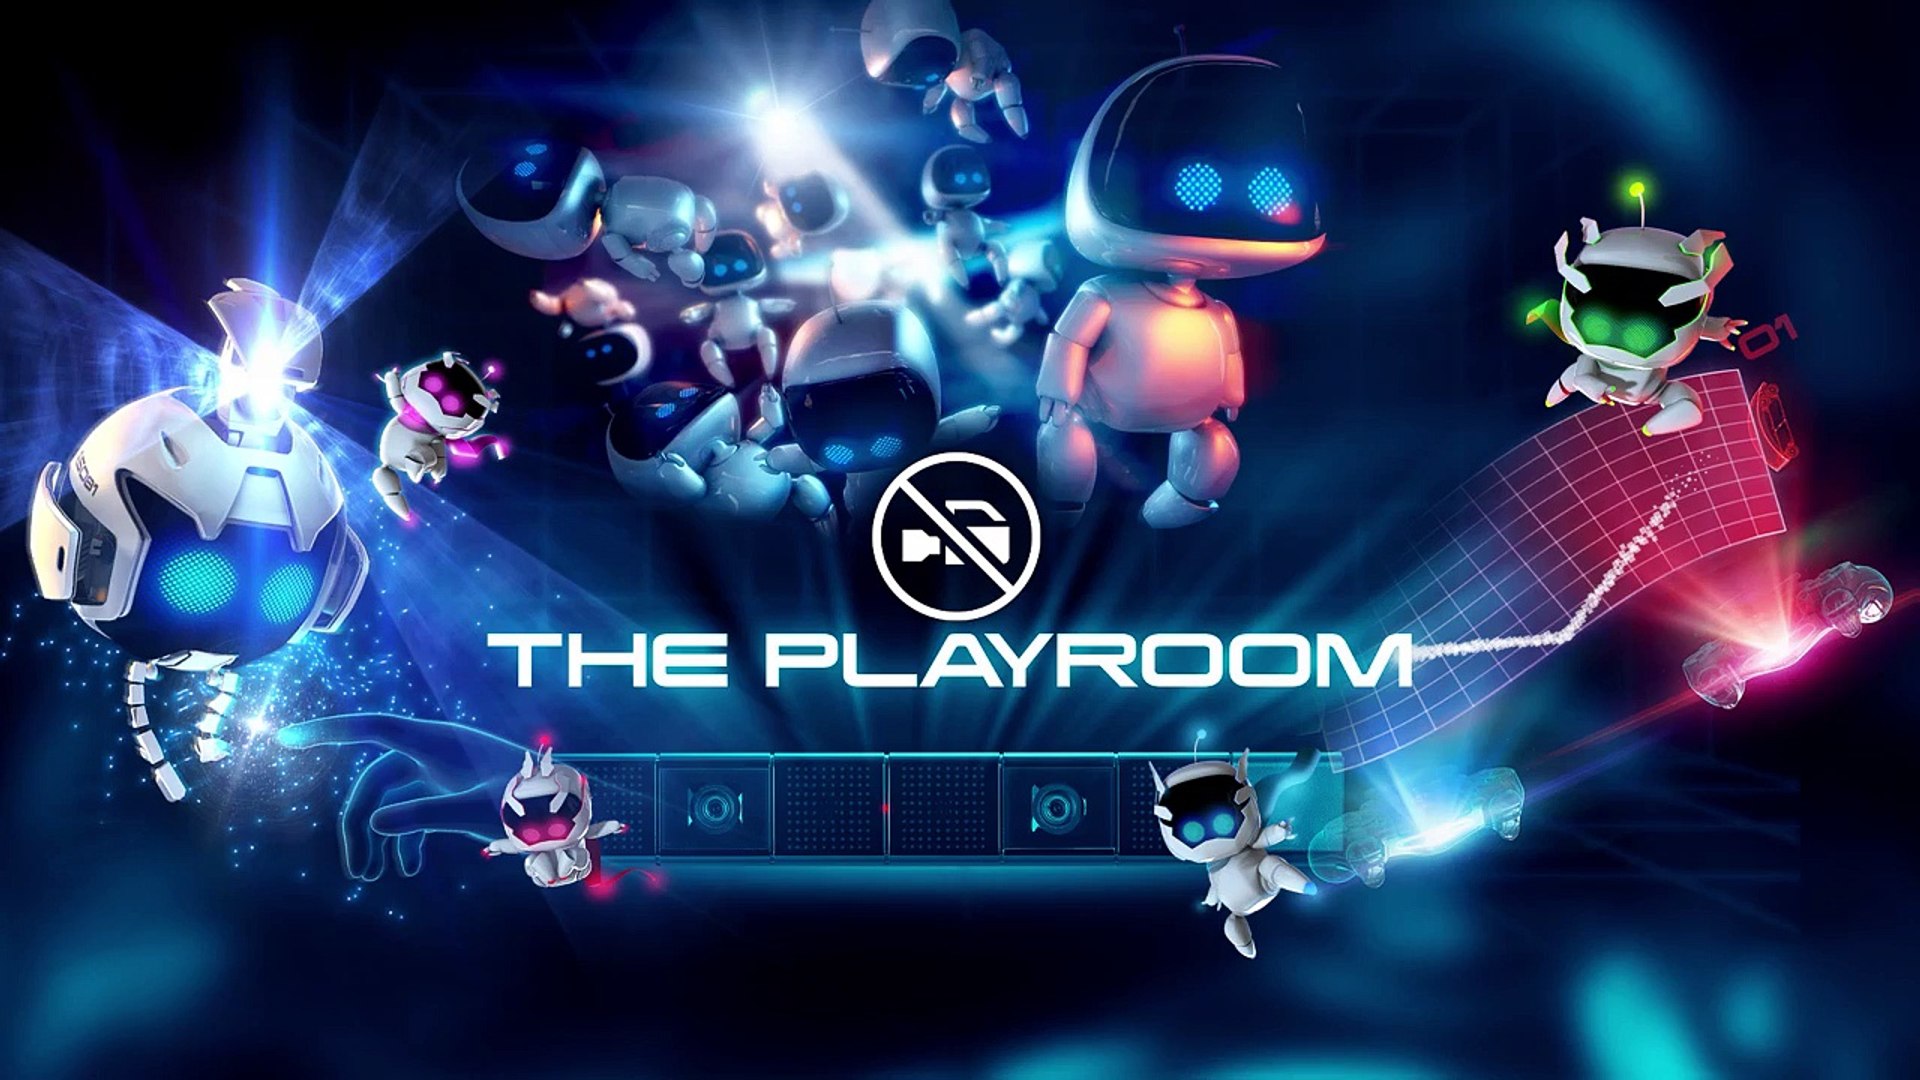 what's the playroom on ps4